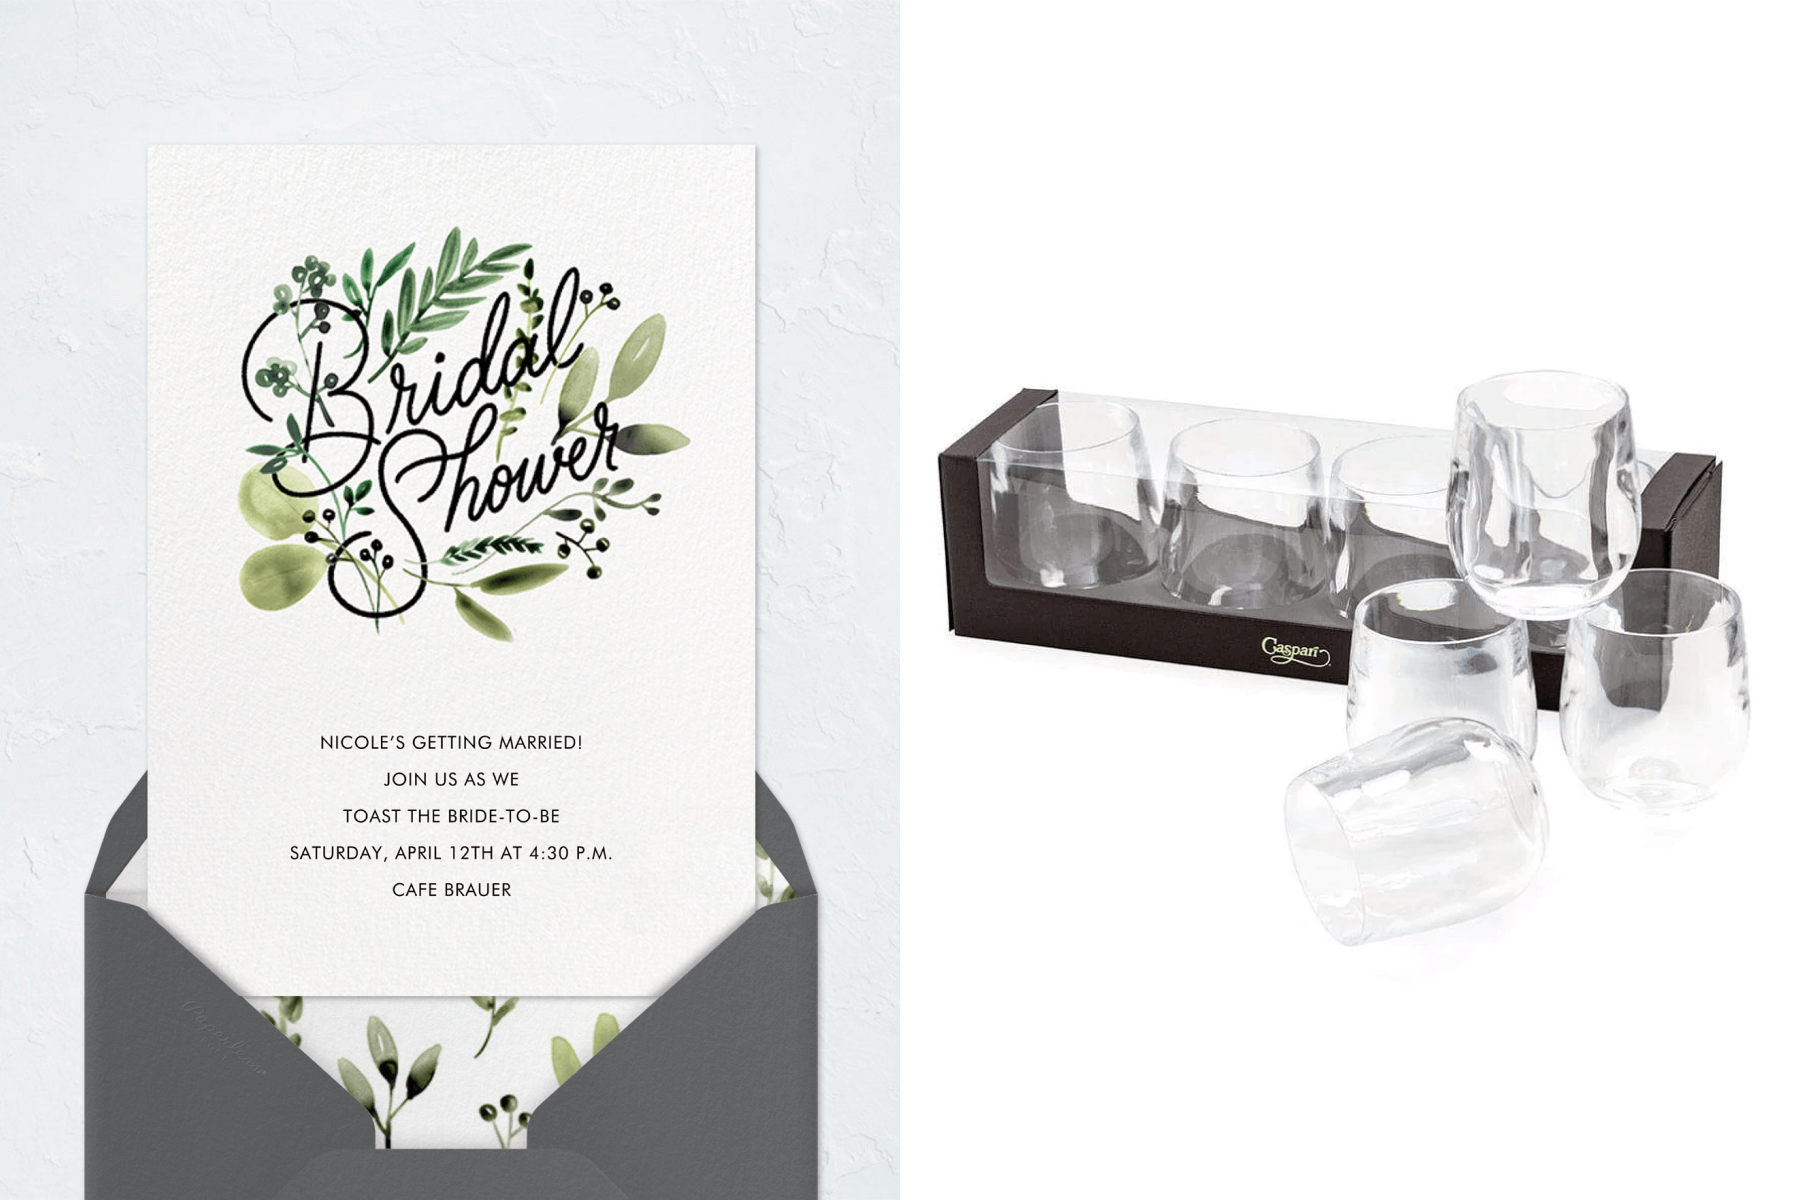 A bridal shower invitation with black oversized script and illustrated leaves and berries. Right: A set of acrylic tumbler glasses, some in a box, some stacked in front.